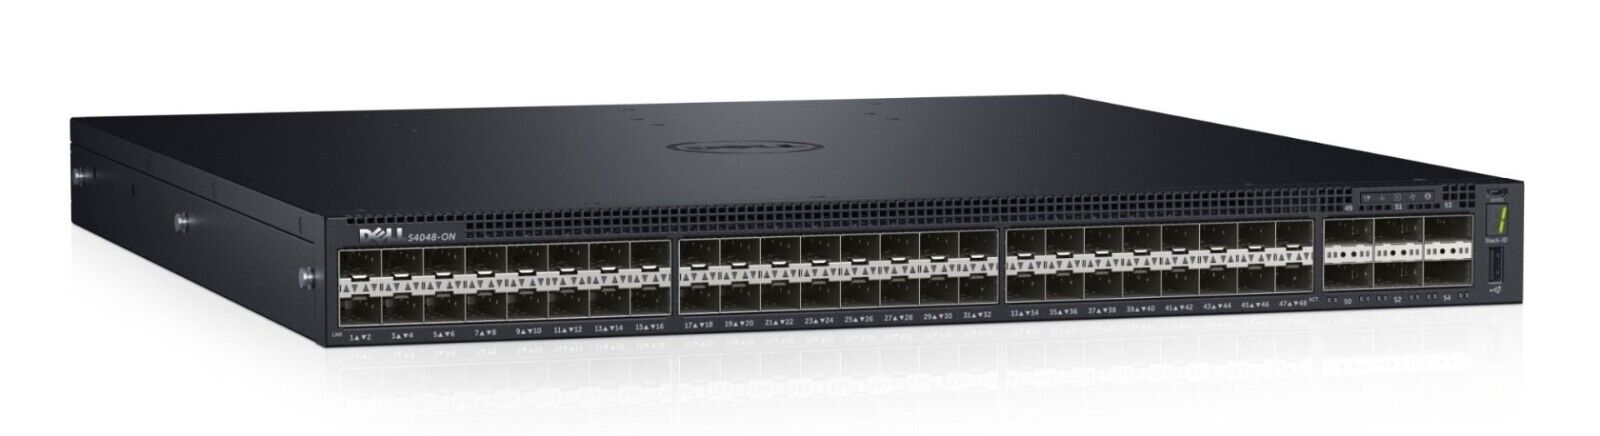 Dell Networking S4048-ON 48 Port Rack Mountable Ethernet Switch